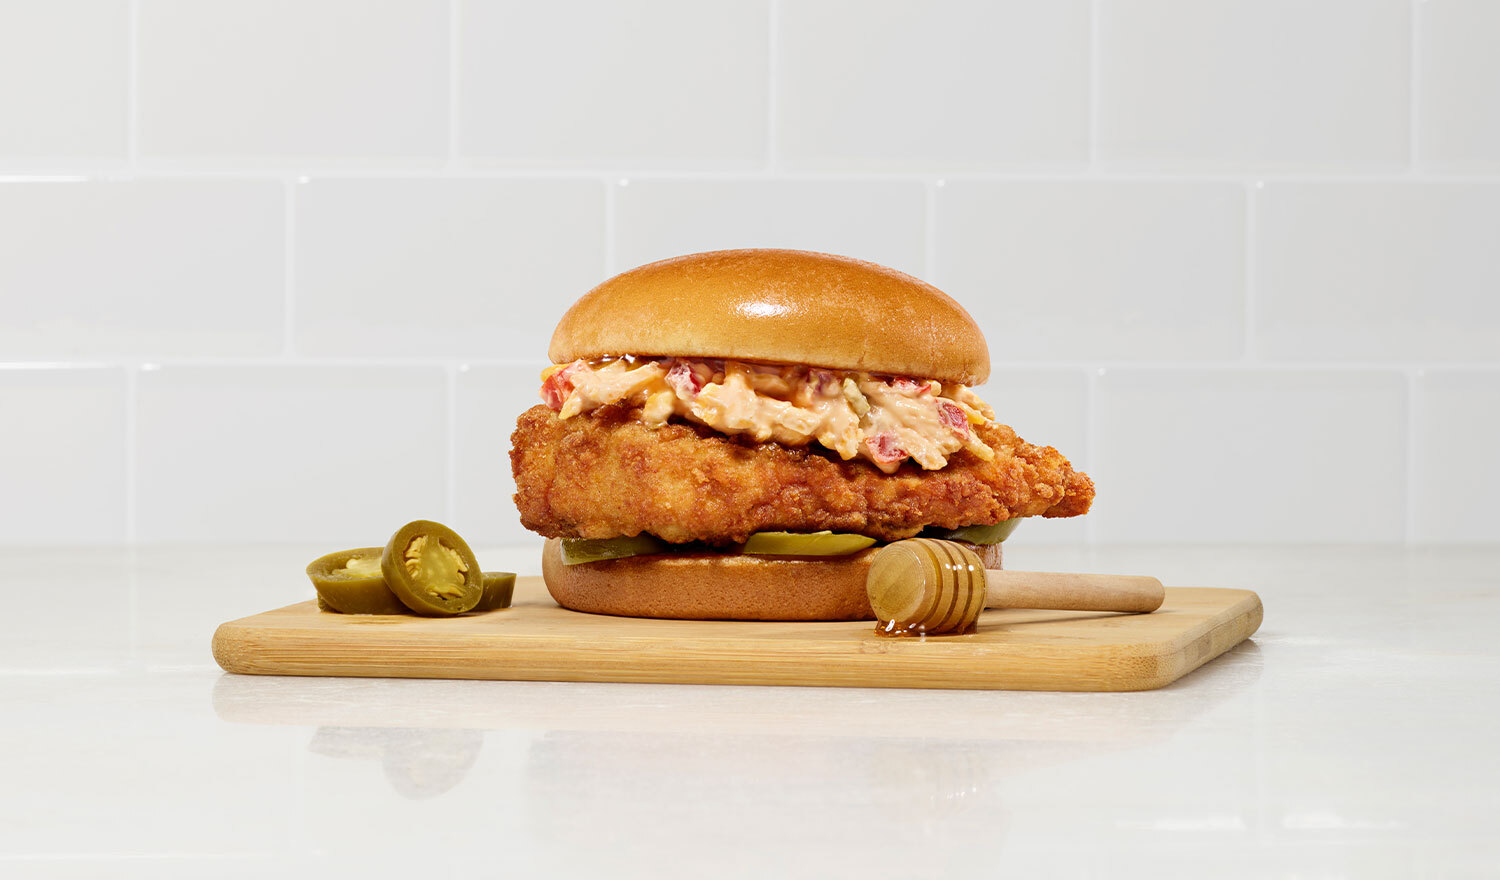 The new sandwich features an original Chick-fil-A filet, custom-made creamy pimento cheese, mild pickled jalapeños and is served on a toasted bun drizzled with sweet honey.